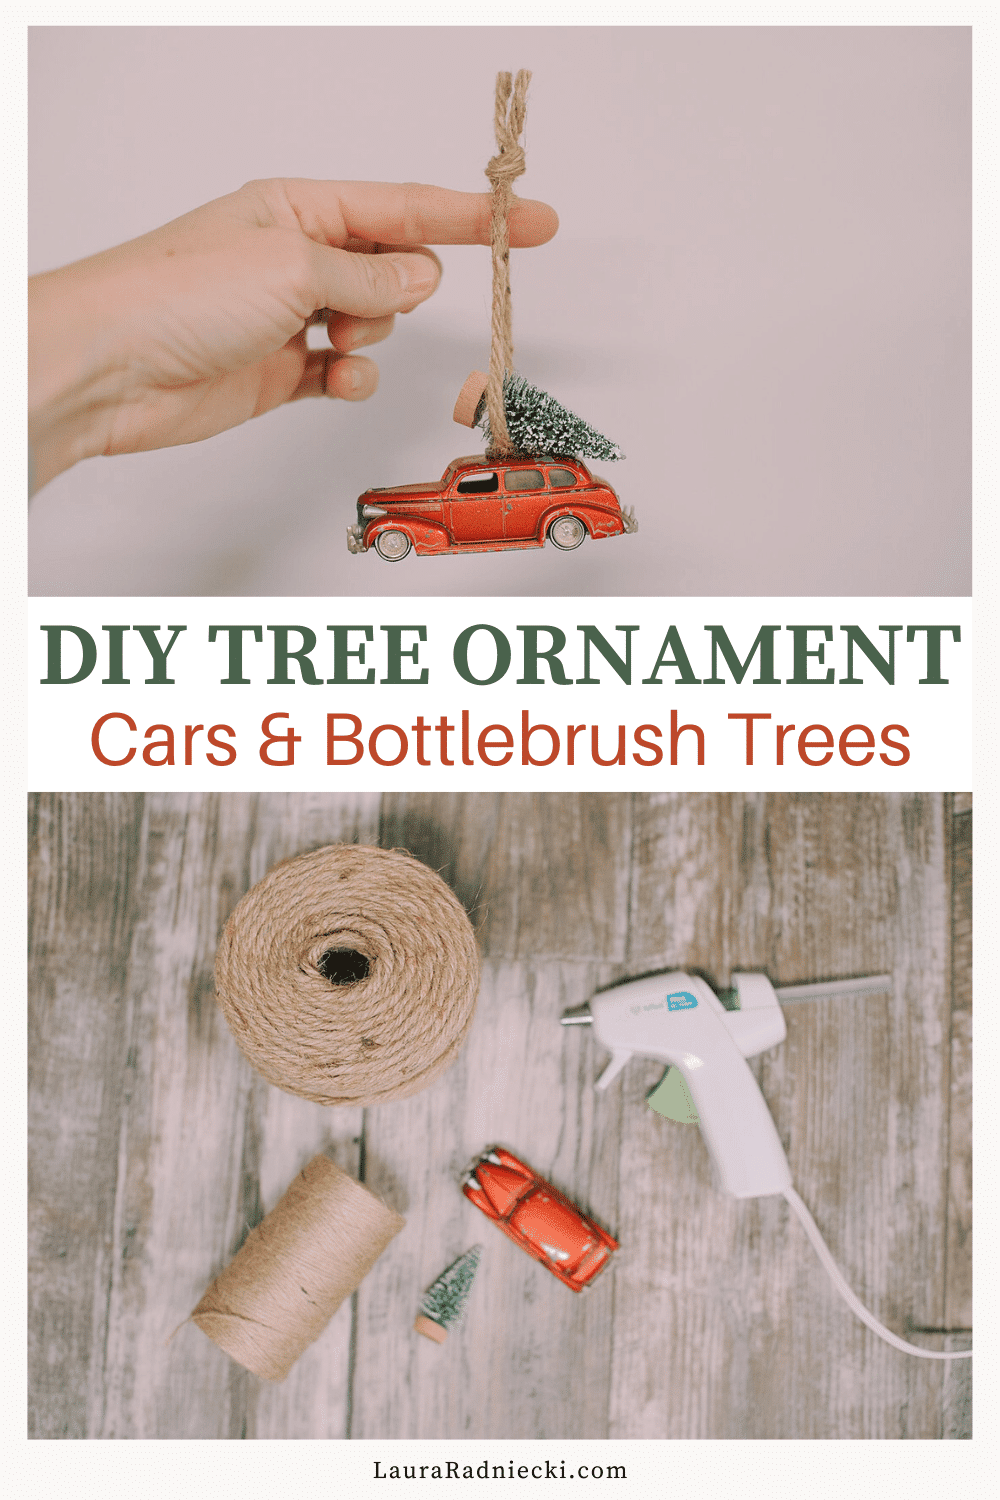 How to Make a DIY Ornament with Old Matchbox Car and Bottle Brush Tree